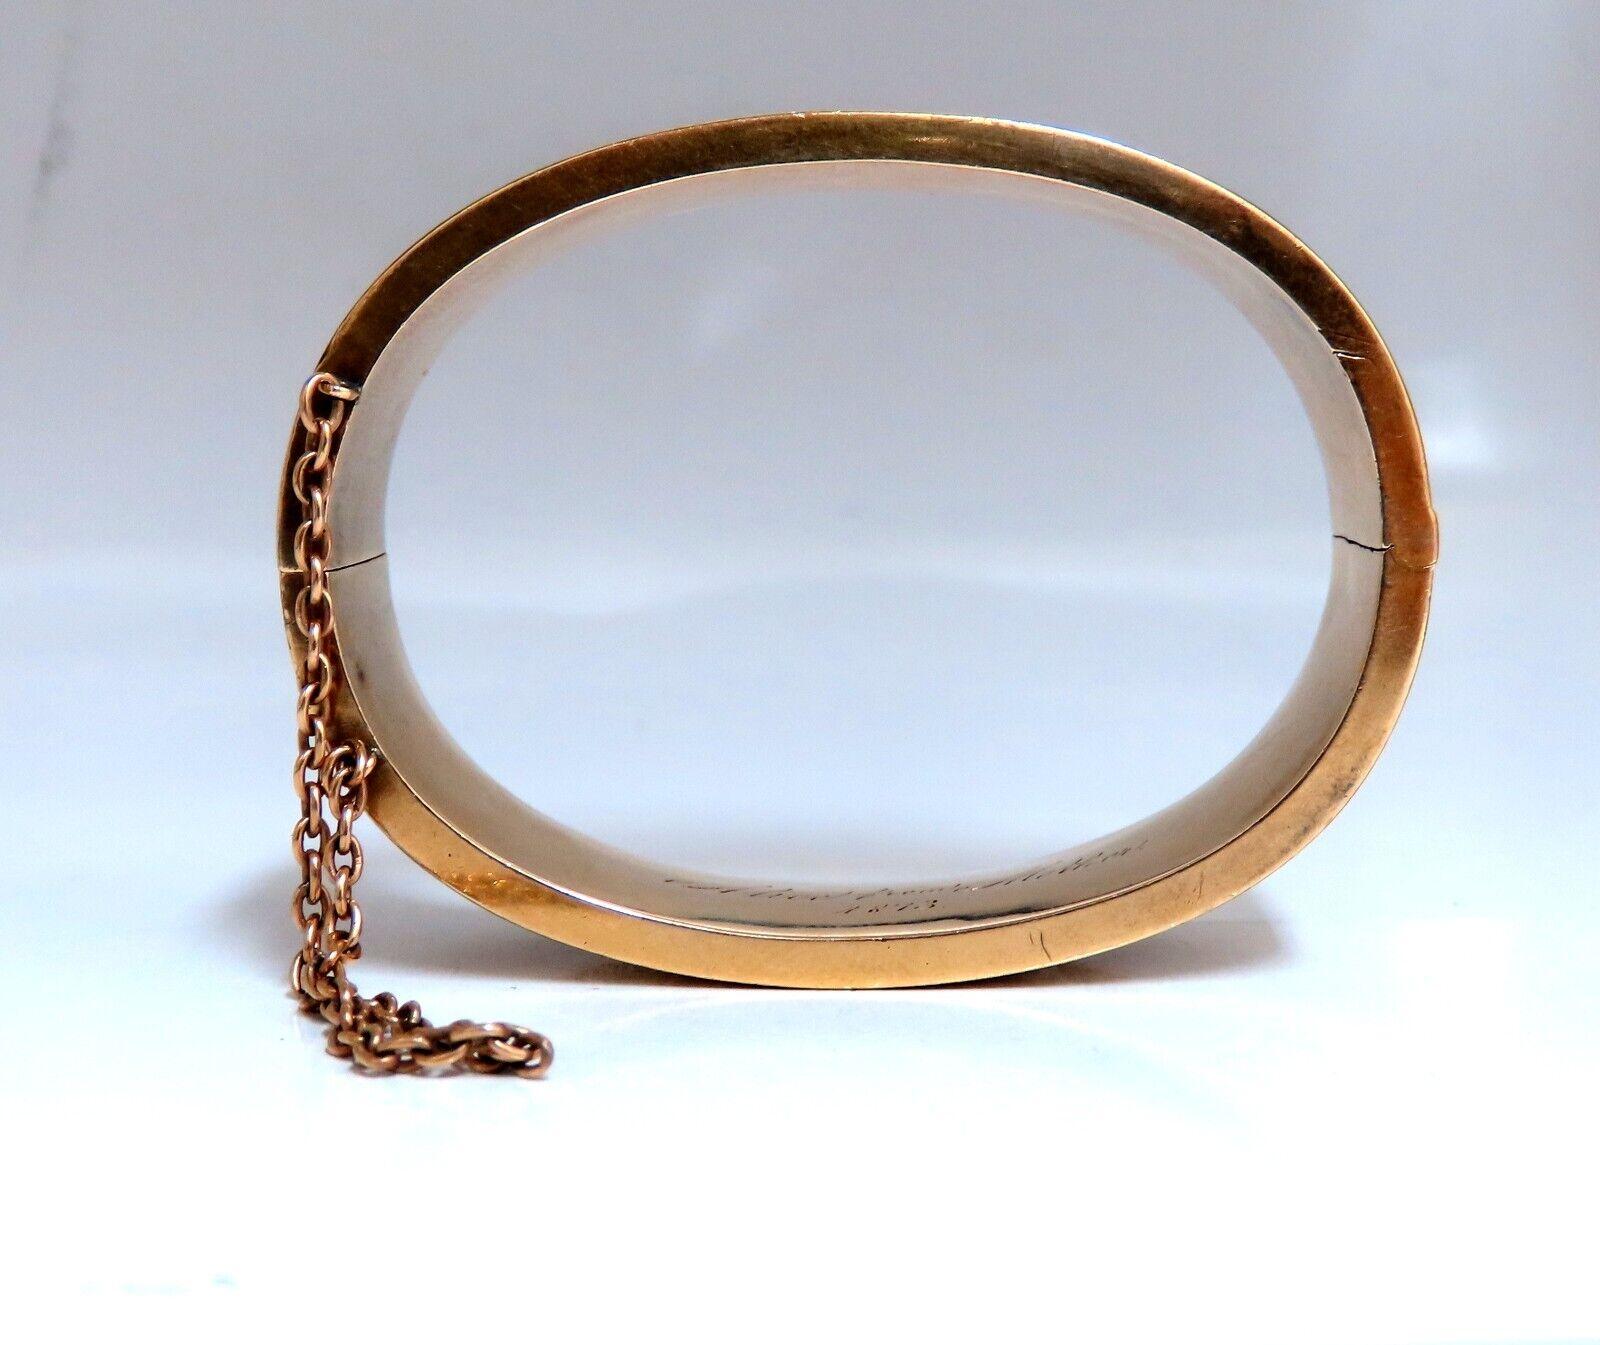 Antique Child's Bangle Bracelet

Intricate Engraving Details

Durable, Well Made

14kt. yellow gold

25.2 Grams.

Should fit 5 inch wrist, please see measurements of inner:

1.5 x 2 inches

16mm wide bangle